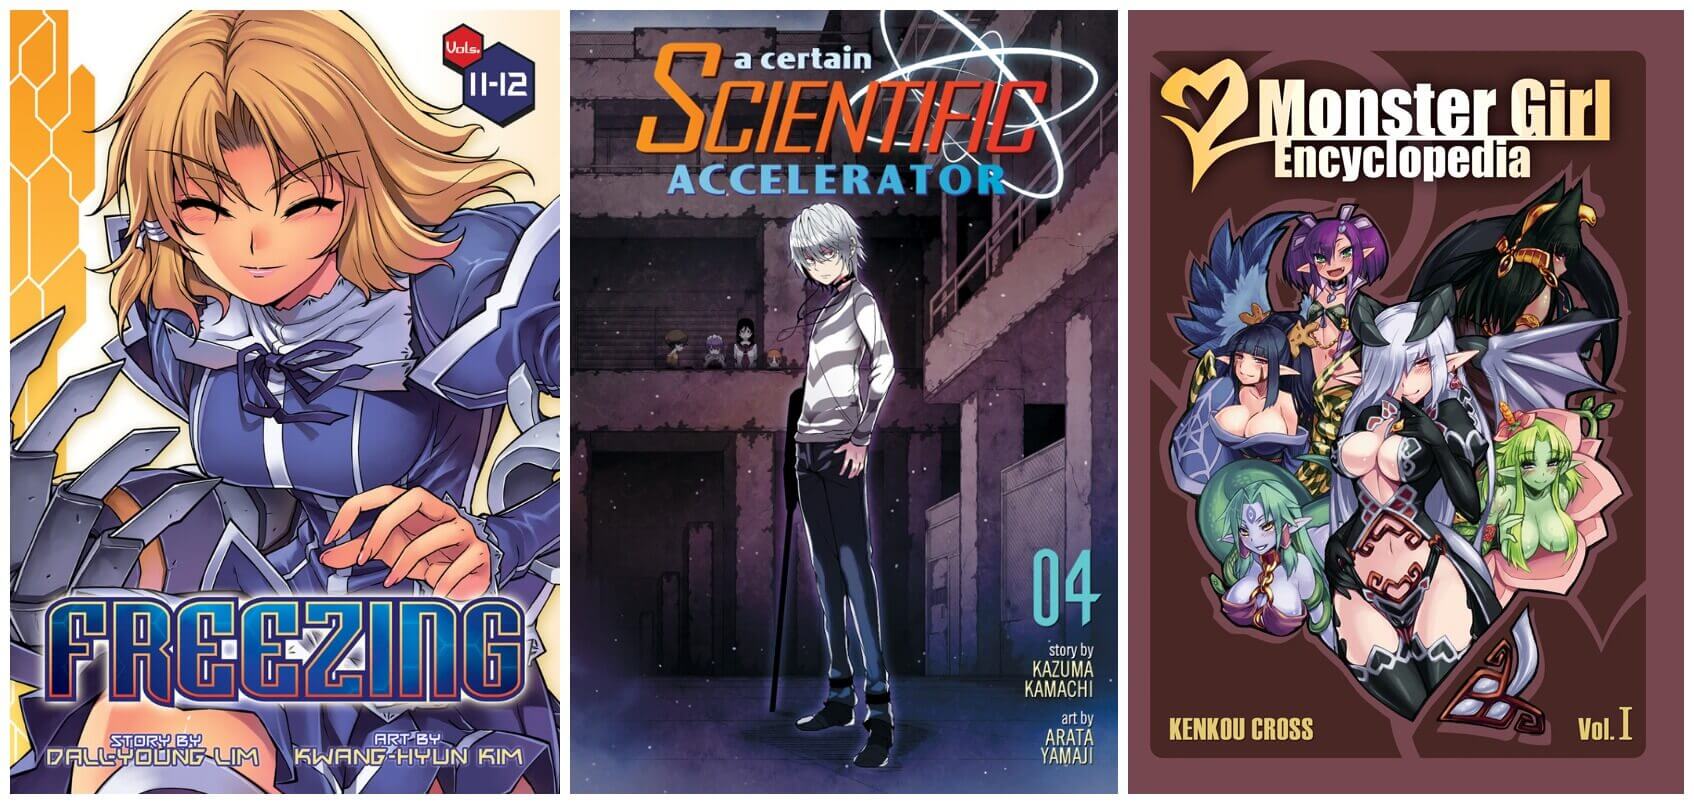 October 2016 Manga Releases Covers for Freezing, A Certain Scientific Accelerator, and Monster Girl Encyclopedia.